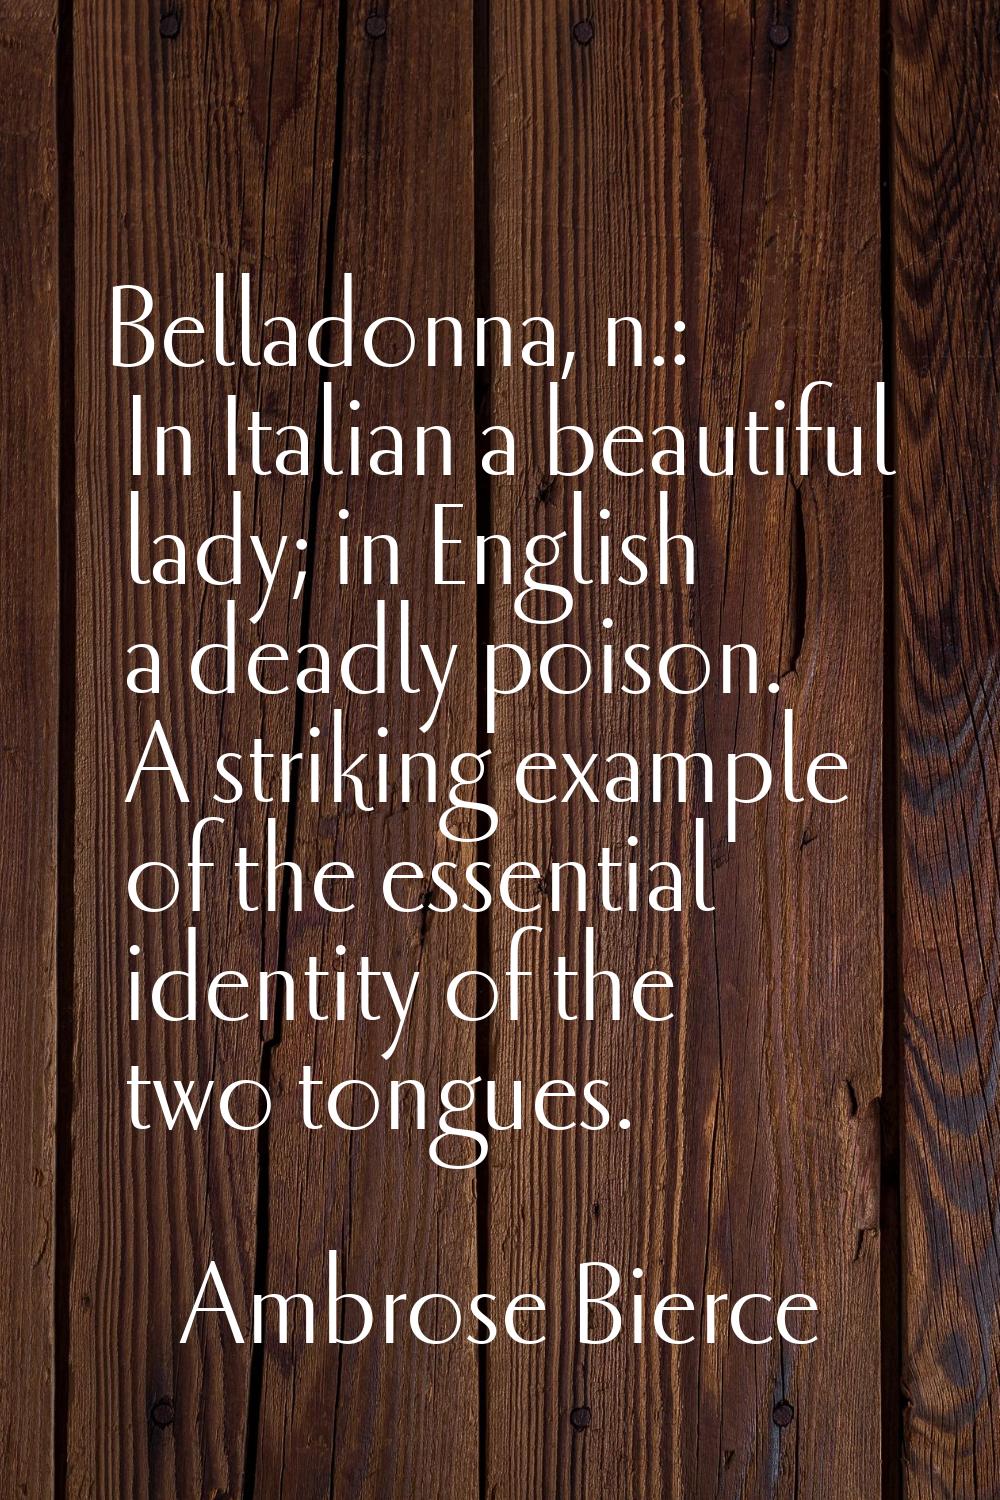 Belladonna, n.: In Italian a beautiful lady; in English a deadly poison. A striking example of the 